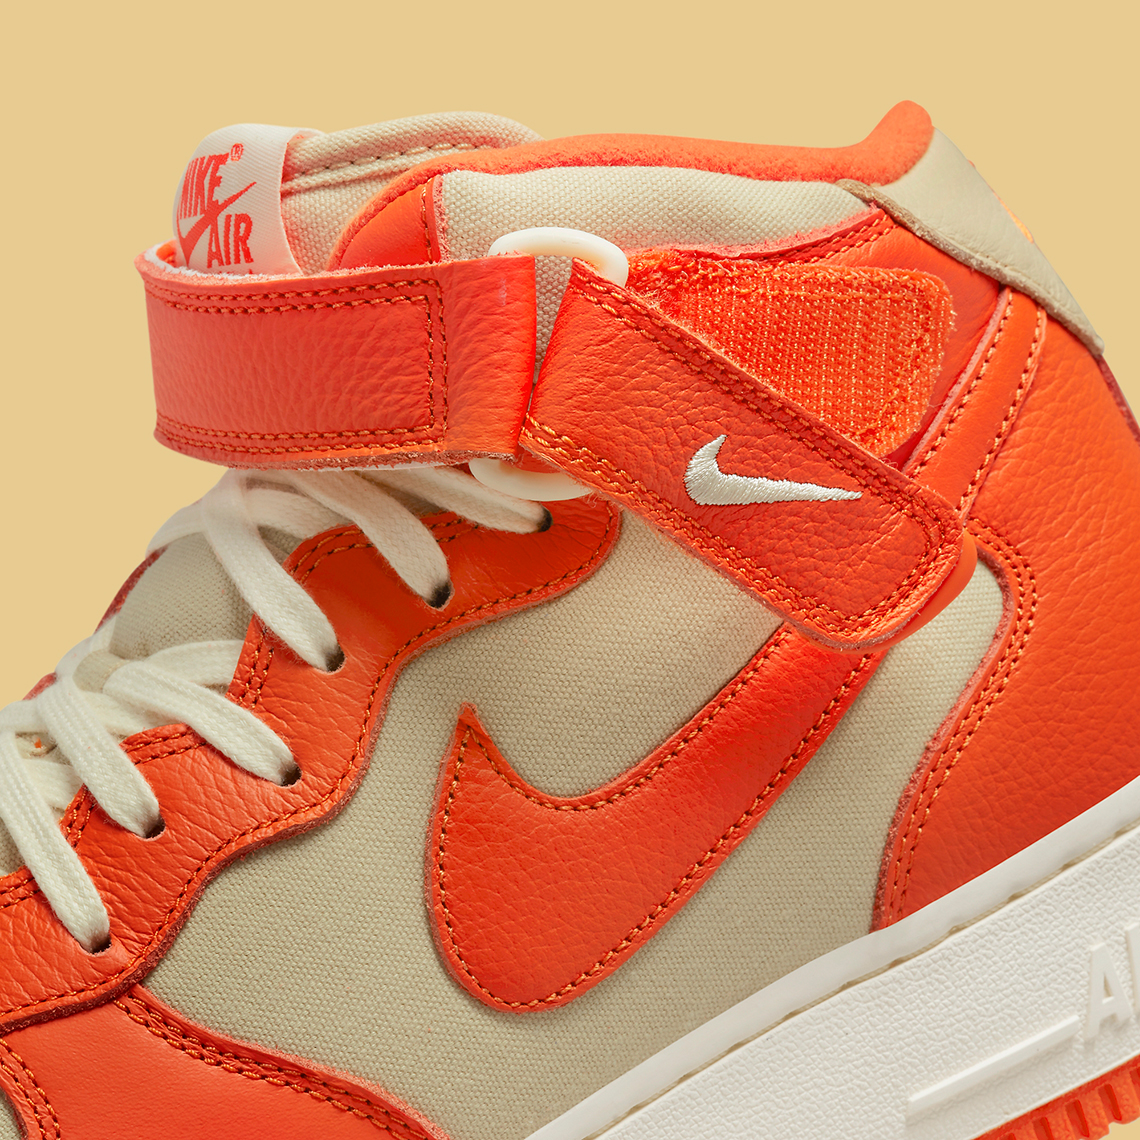 classics revisited nike air trainer 1 sb paul brown Mid Team Gold Safety Orange Fb2036 700 9